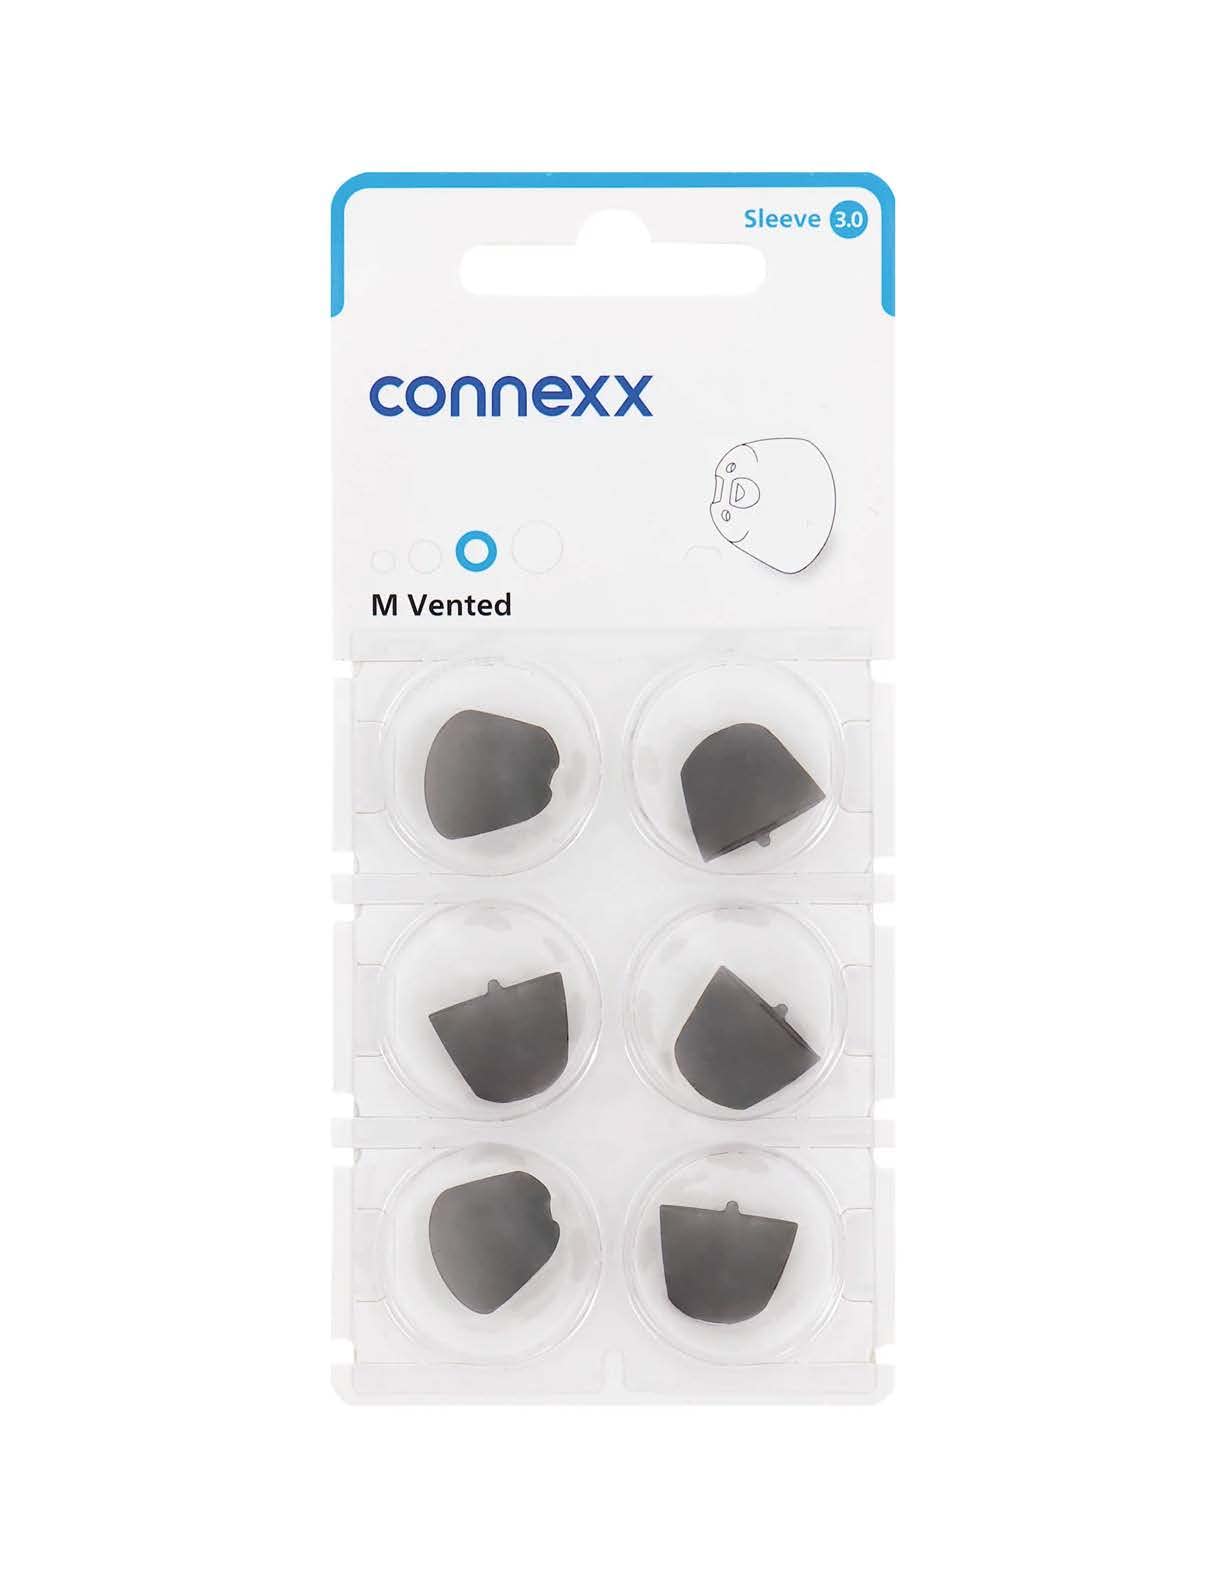 New - Connexx Sleeve 3.0 Vented by Signia (Formerly Known as Siemens) (Medium)